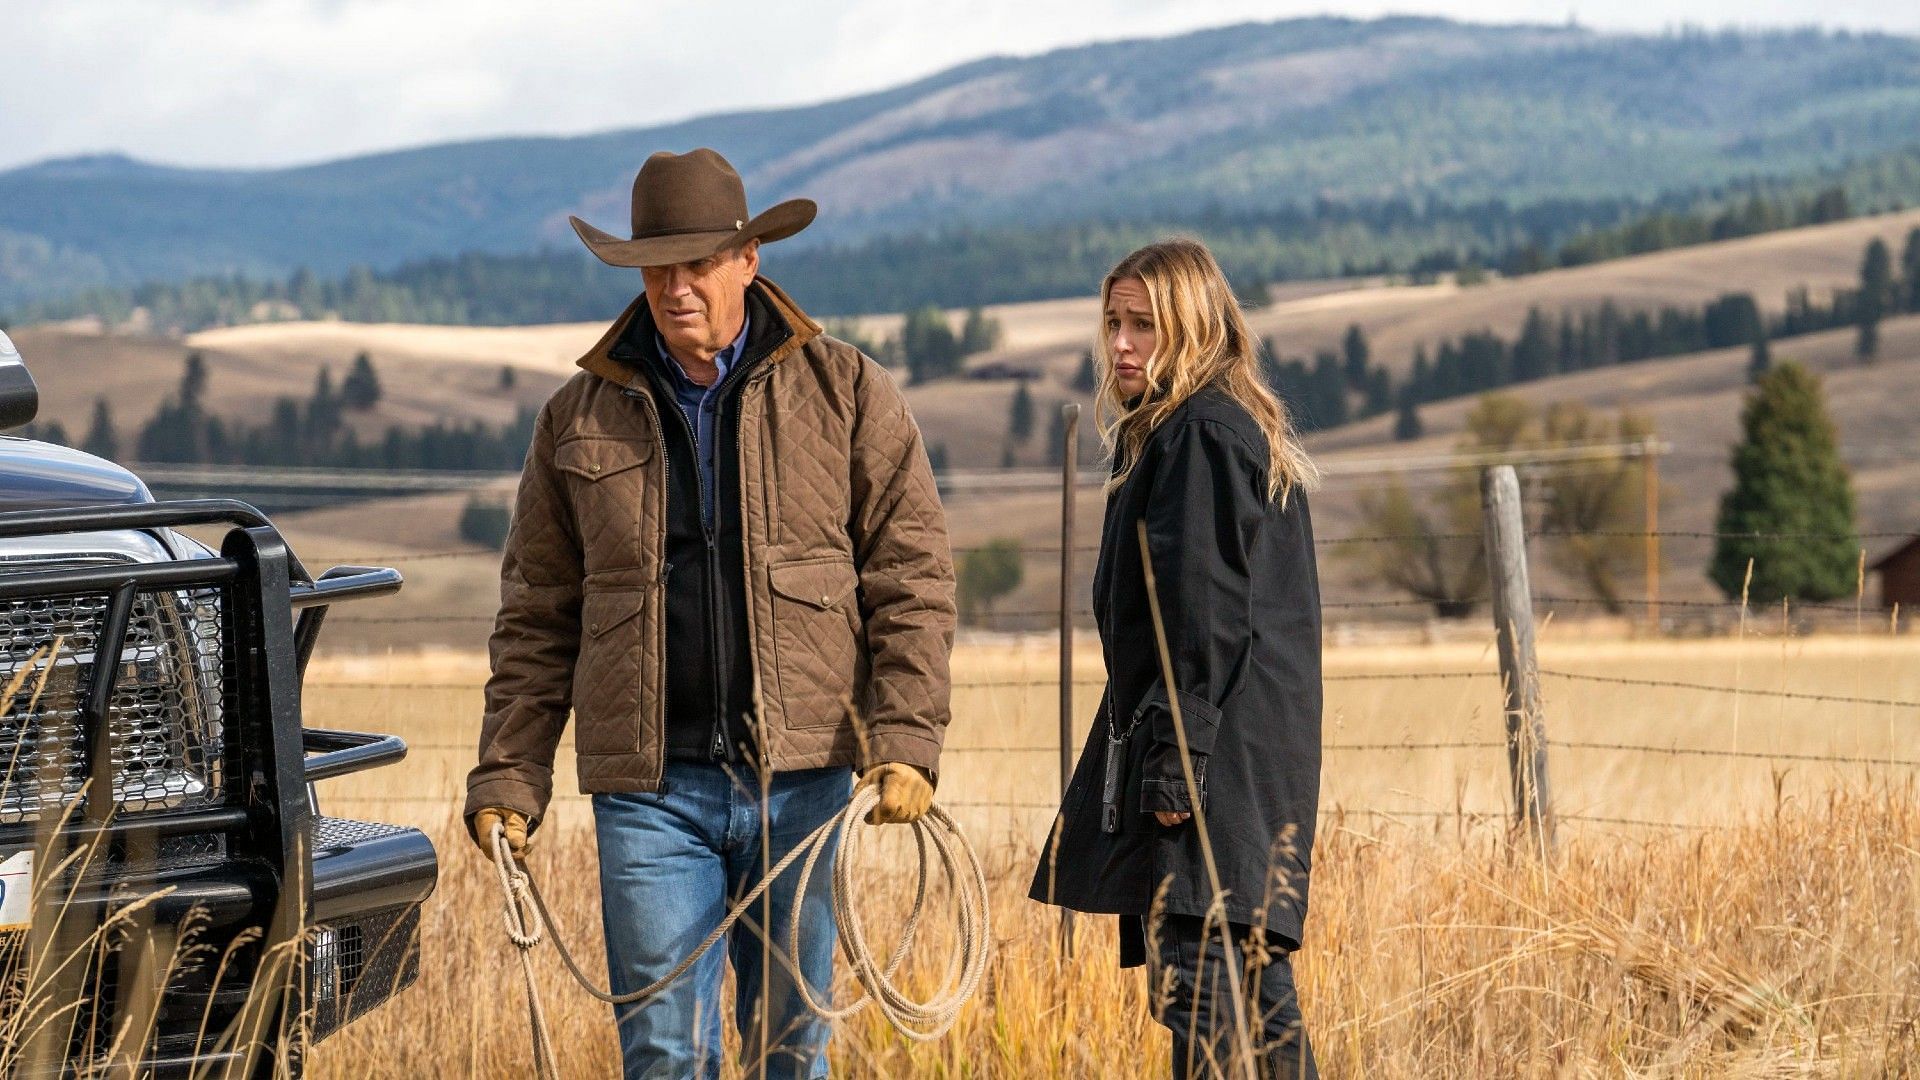 The 8th episode of Yellowstone season 5 has been titled A Knife and No Coin. (Photo via Paramount)